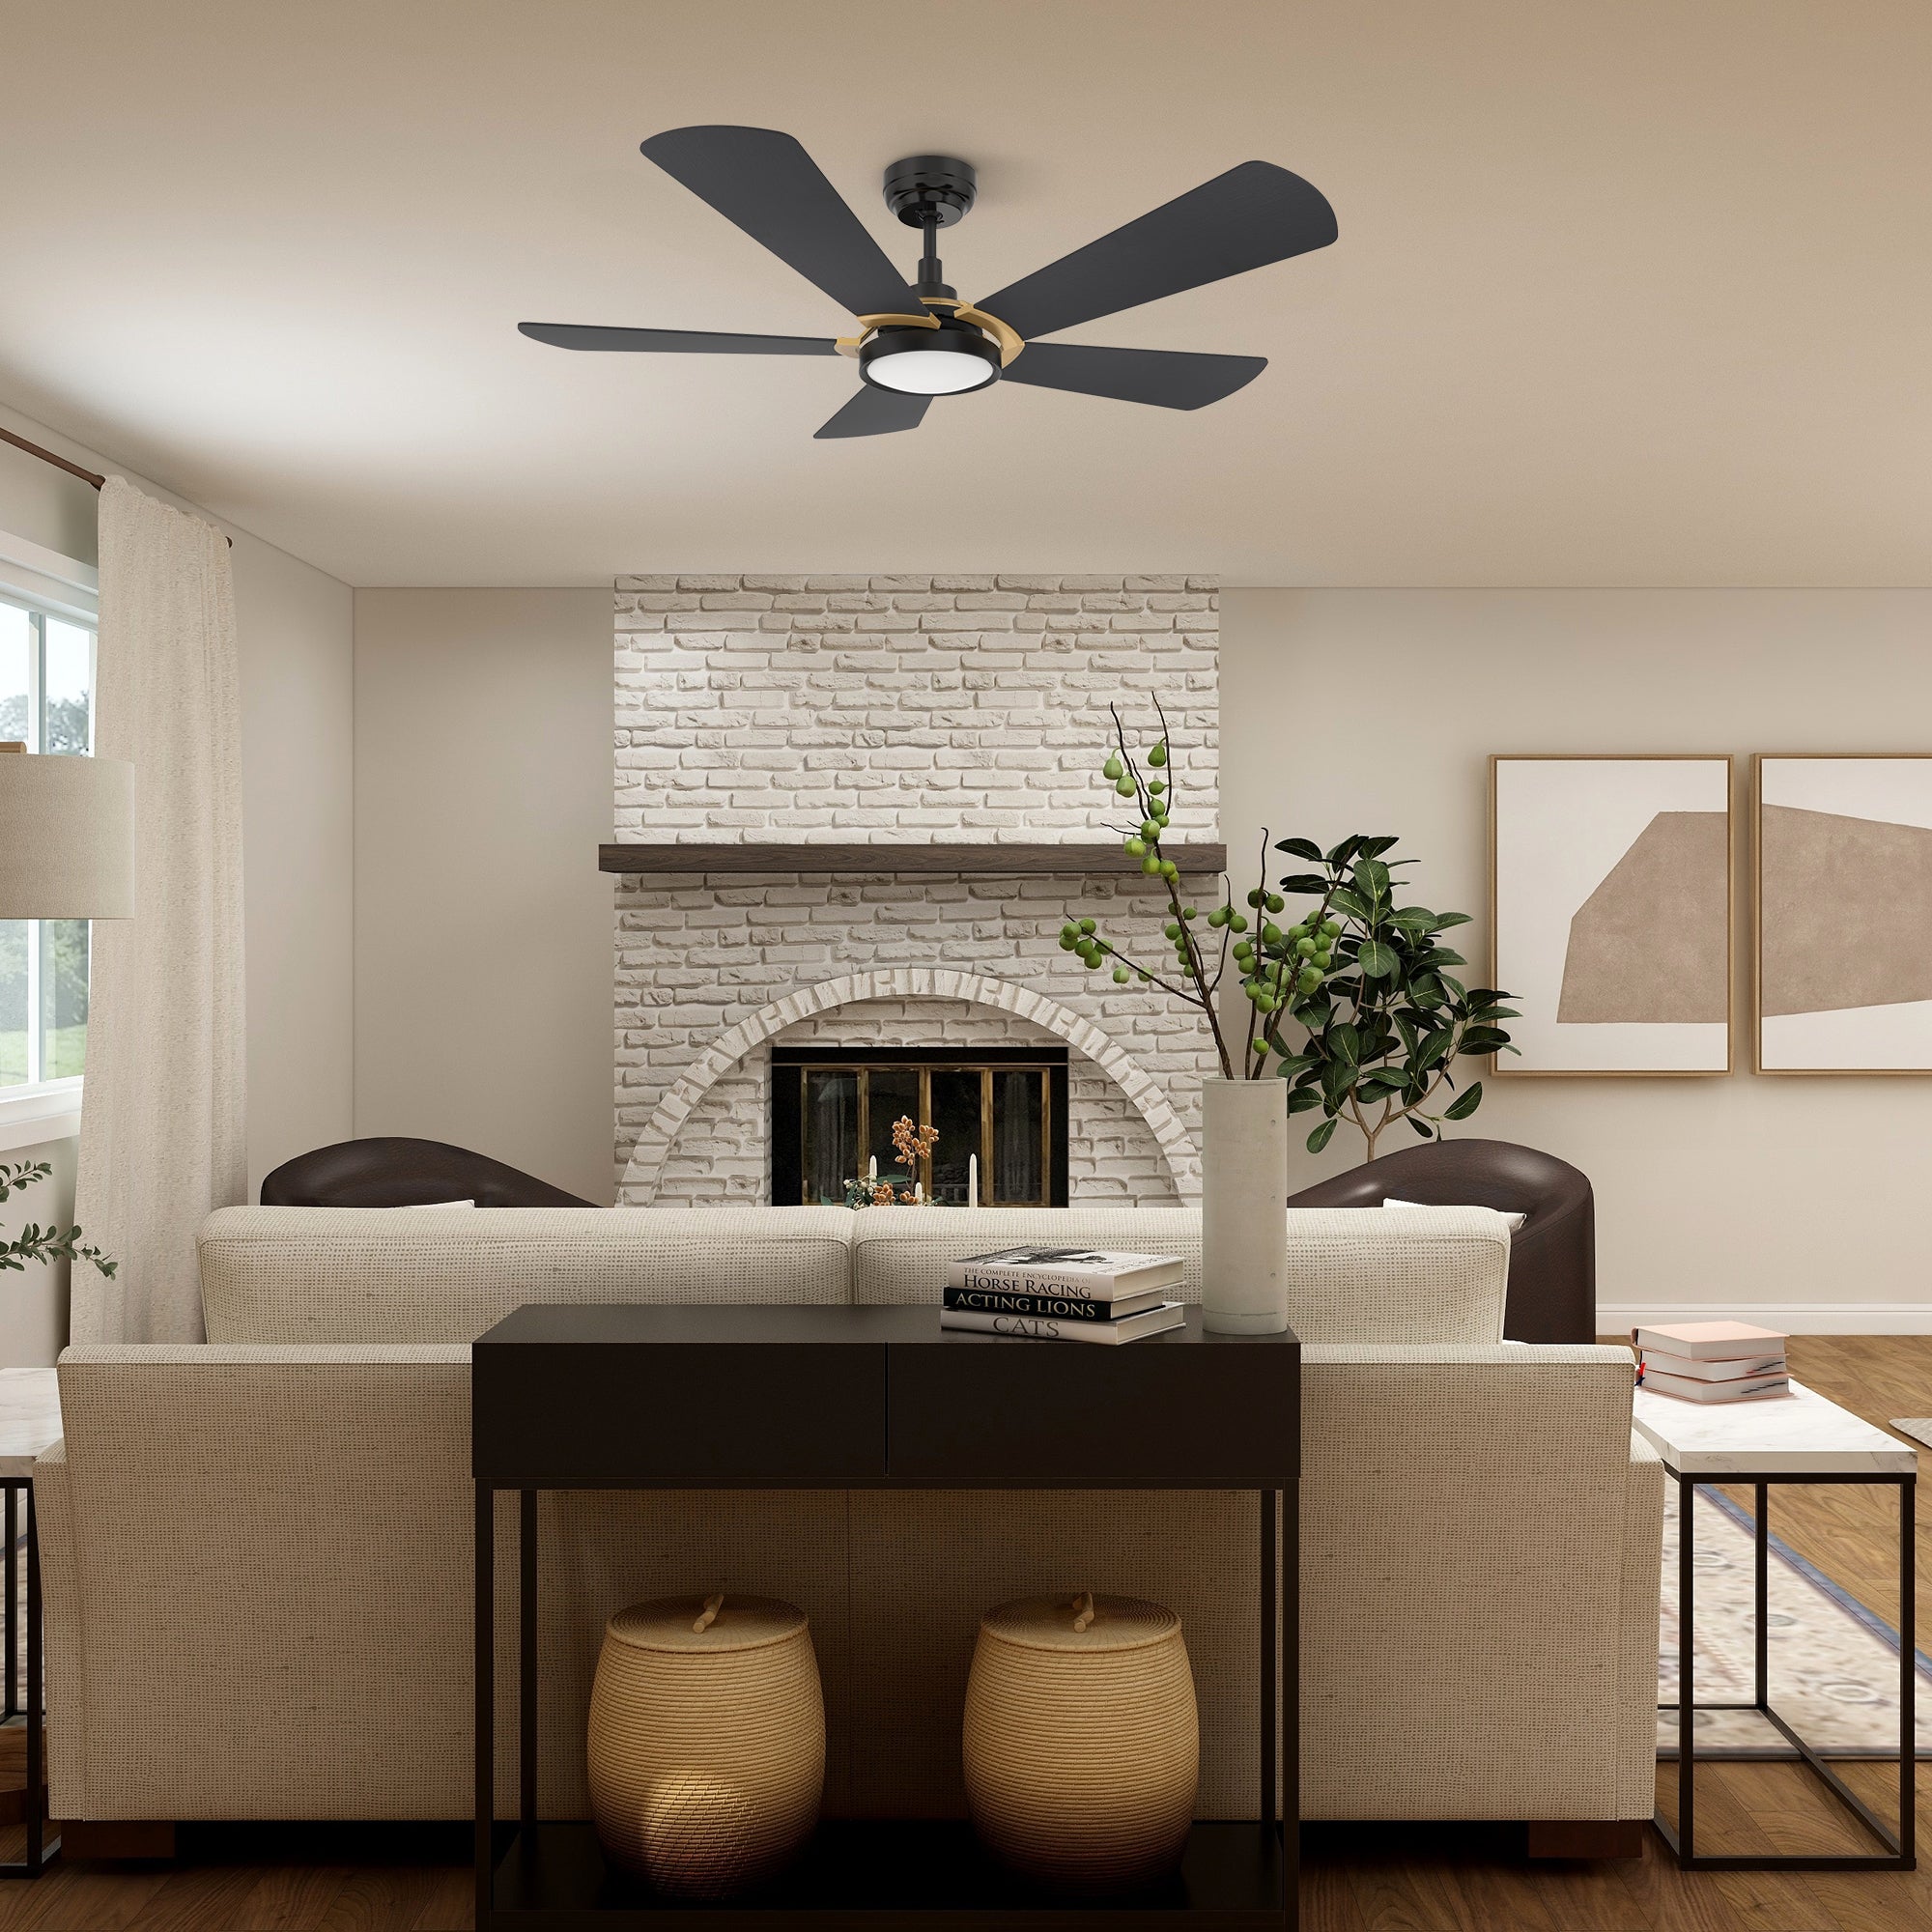 This Smafan Wilkes 56&#39;&#39; smart ceiling fan keeps your space cool, bright, and stylish. It is a soft modern masterpiece perfect for your large indoor living spaces. This Wifi smart ceiling fan is a simplicity designing with Black finish, use elegant Plywood blades, Glass shade and has an integrated 4000K LED daylight. The fan features Remote control, Wi-Fi apps, Siri Shortcut and Voice control technology (compatible with Amazon Alexa and Google Home Assistant ) to set fan preferences.